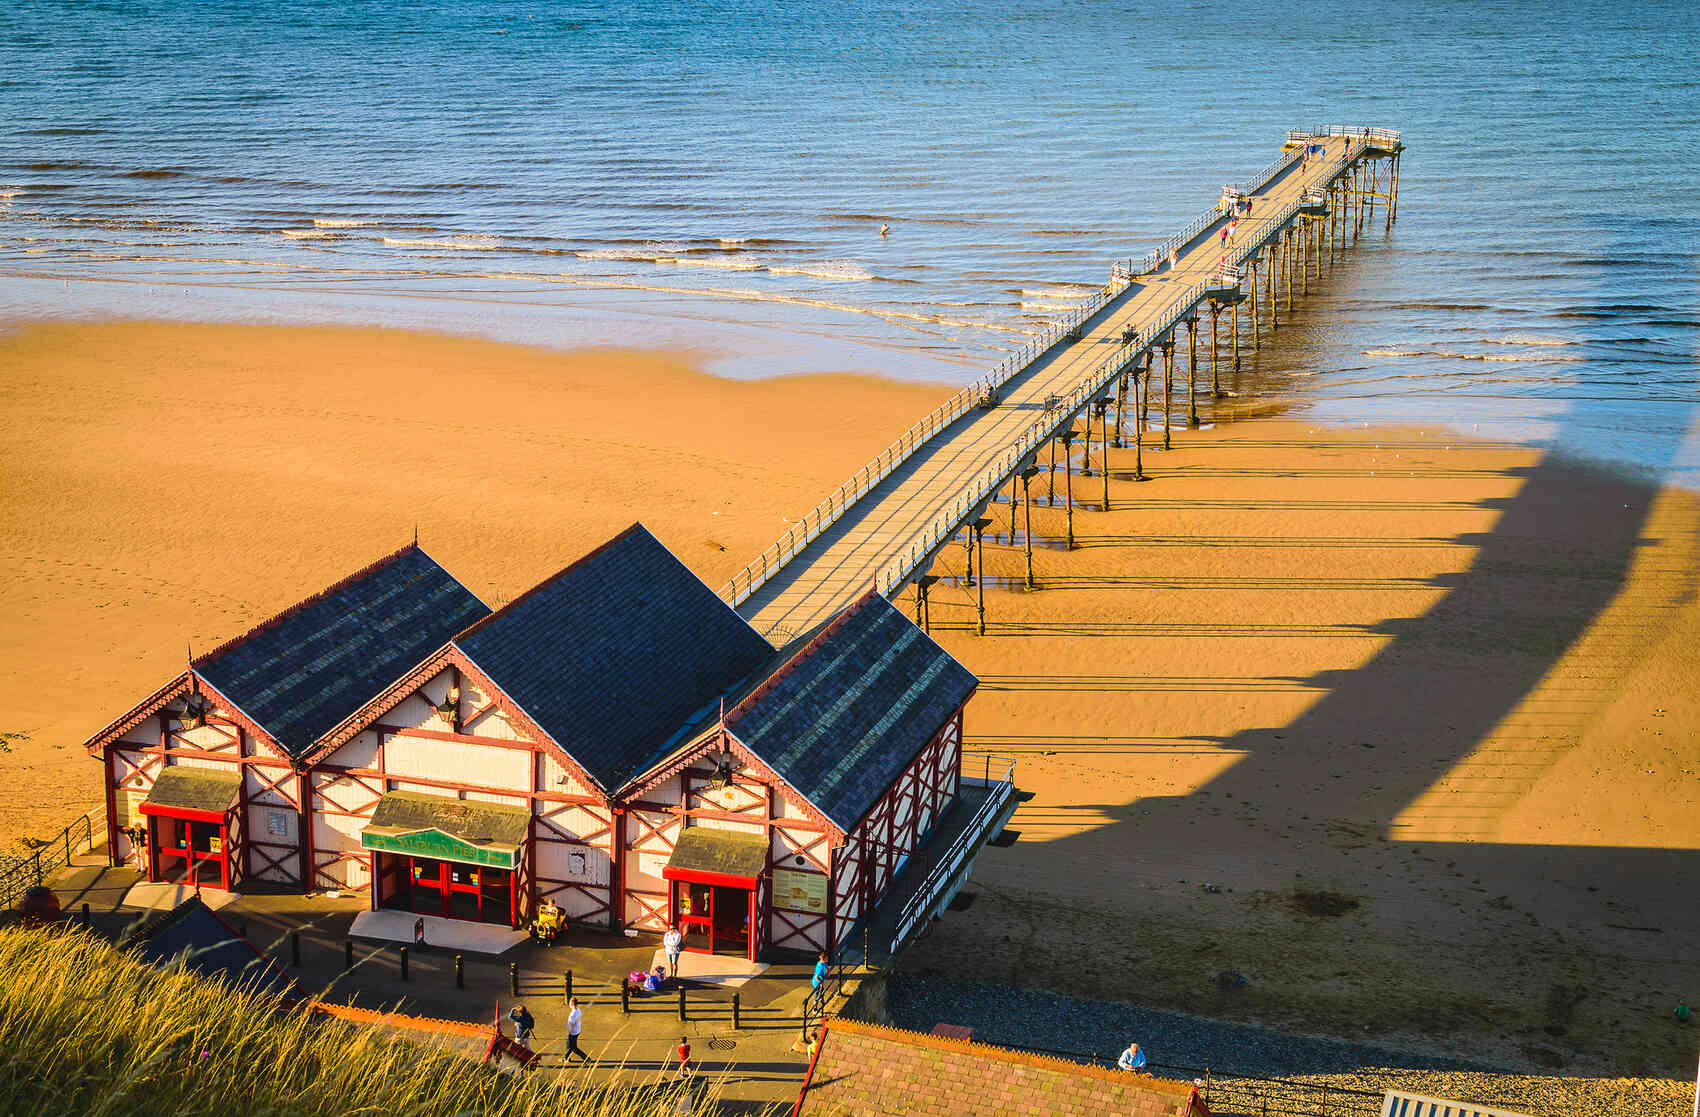 Pier at Saltburn by the Sea